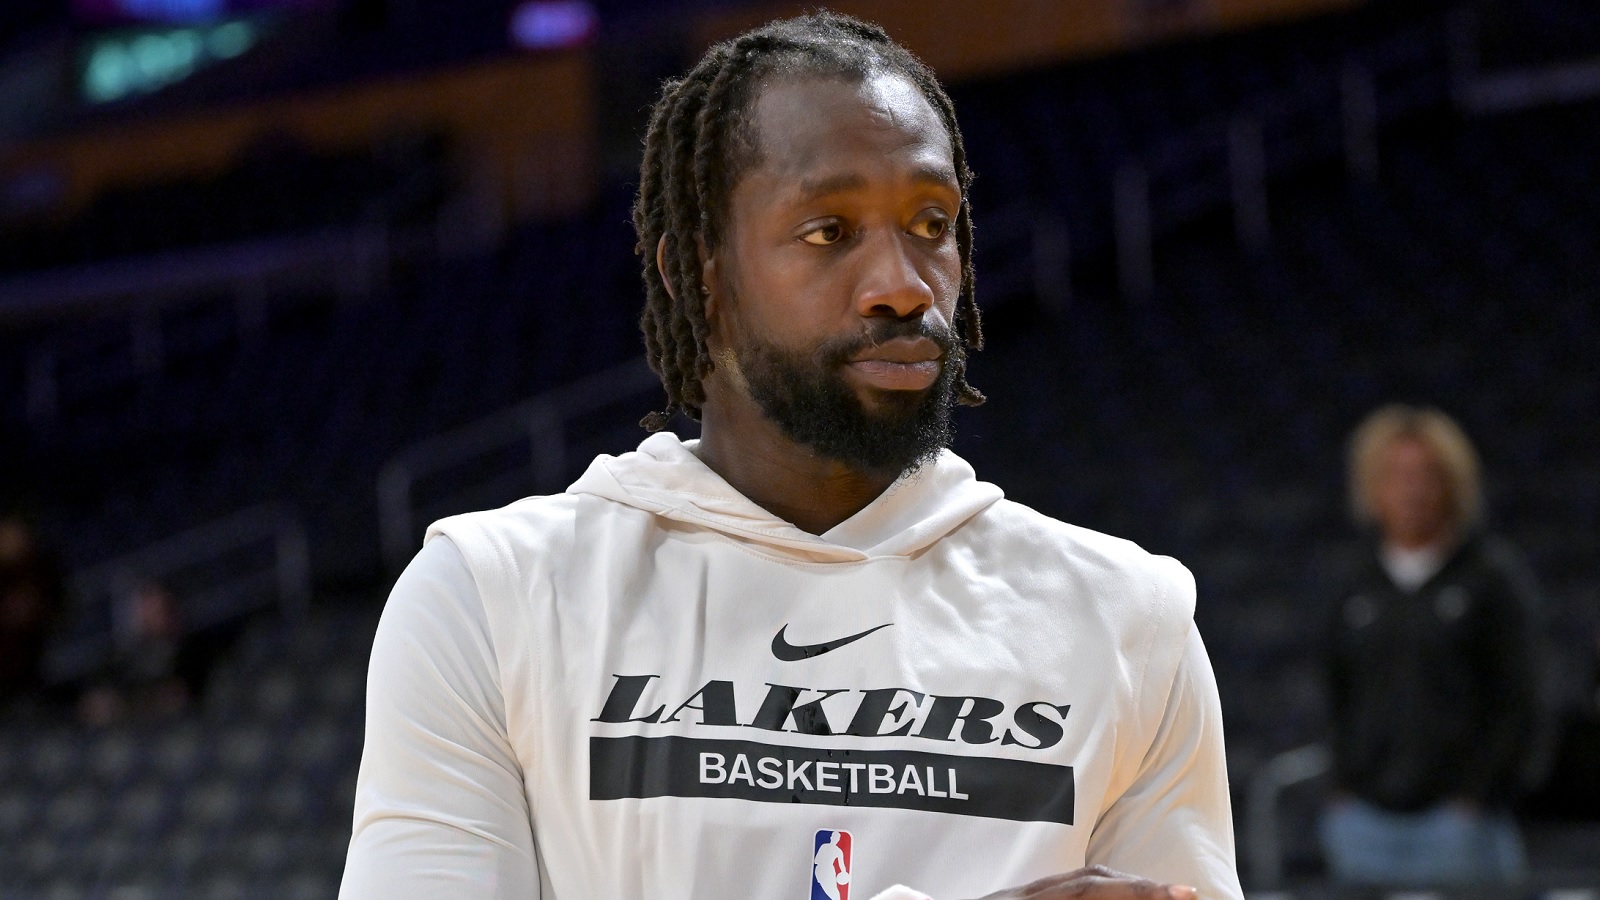 WATCH: First look at Patrick Beverley in his Lakers jersey will get fans  hyped